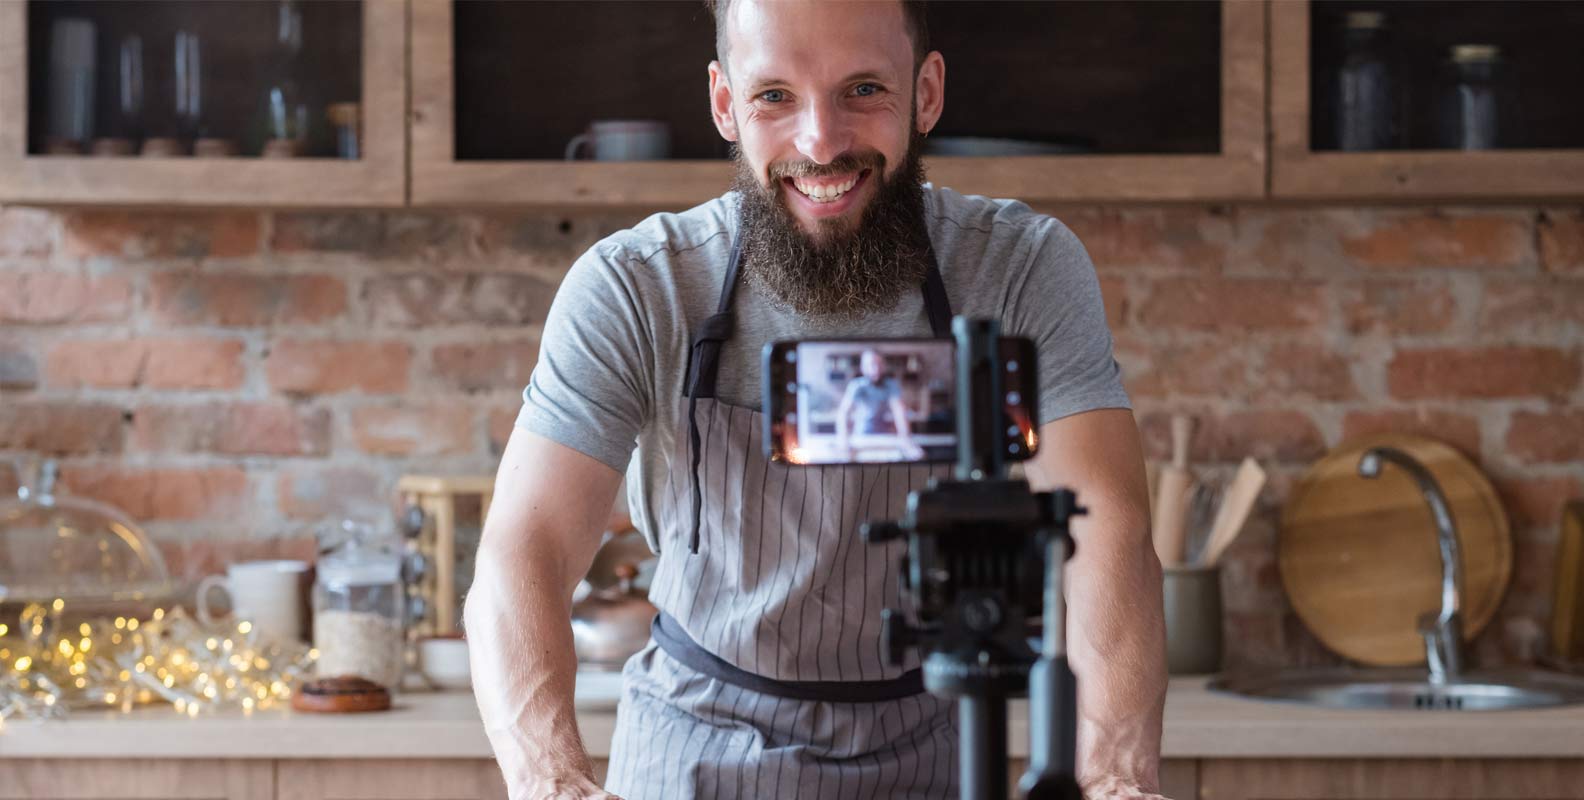 Man using phone to live stream in kitchen